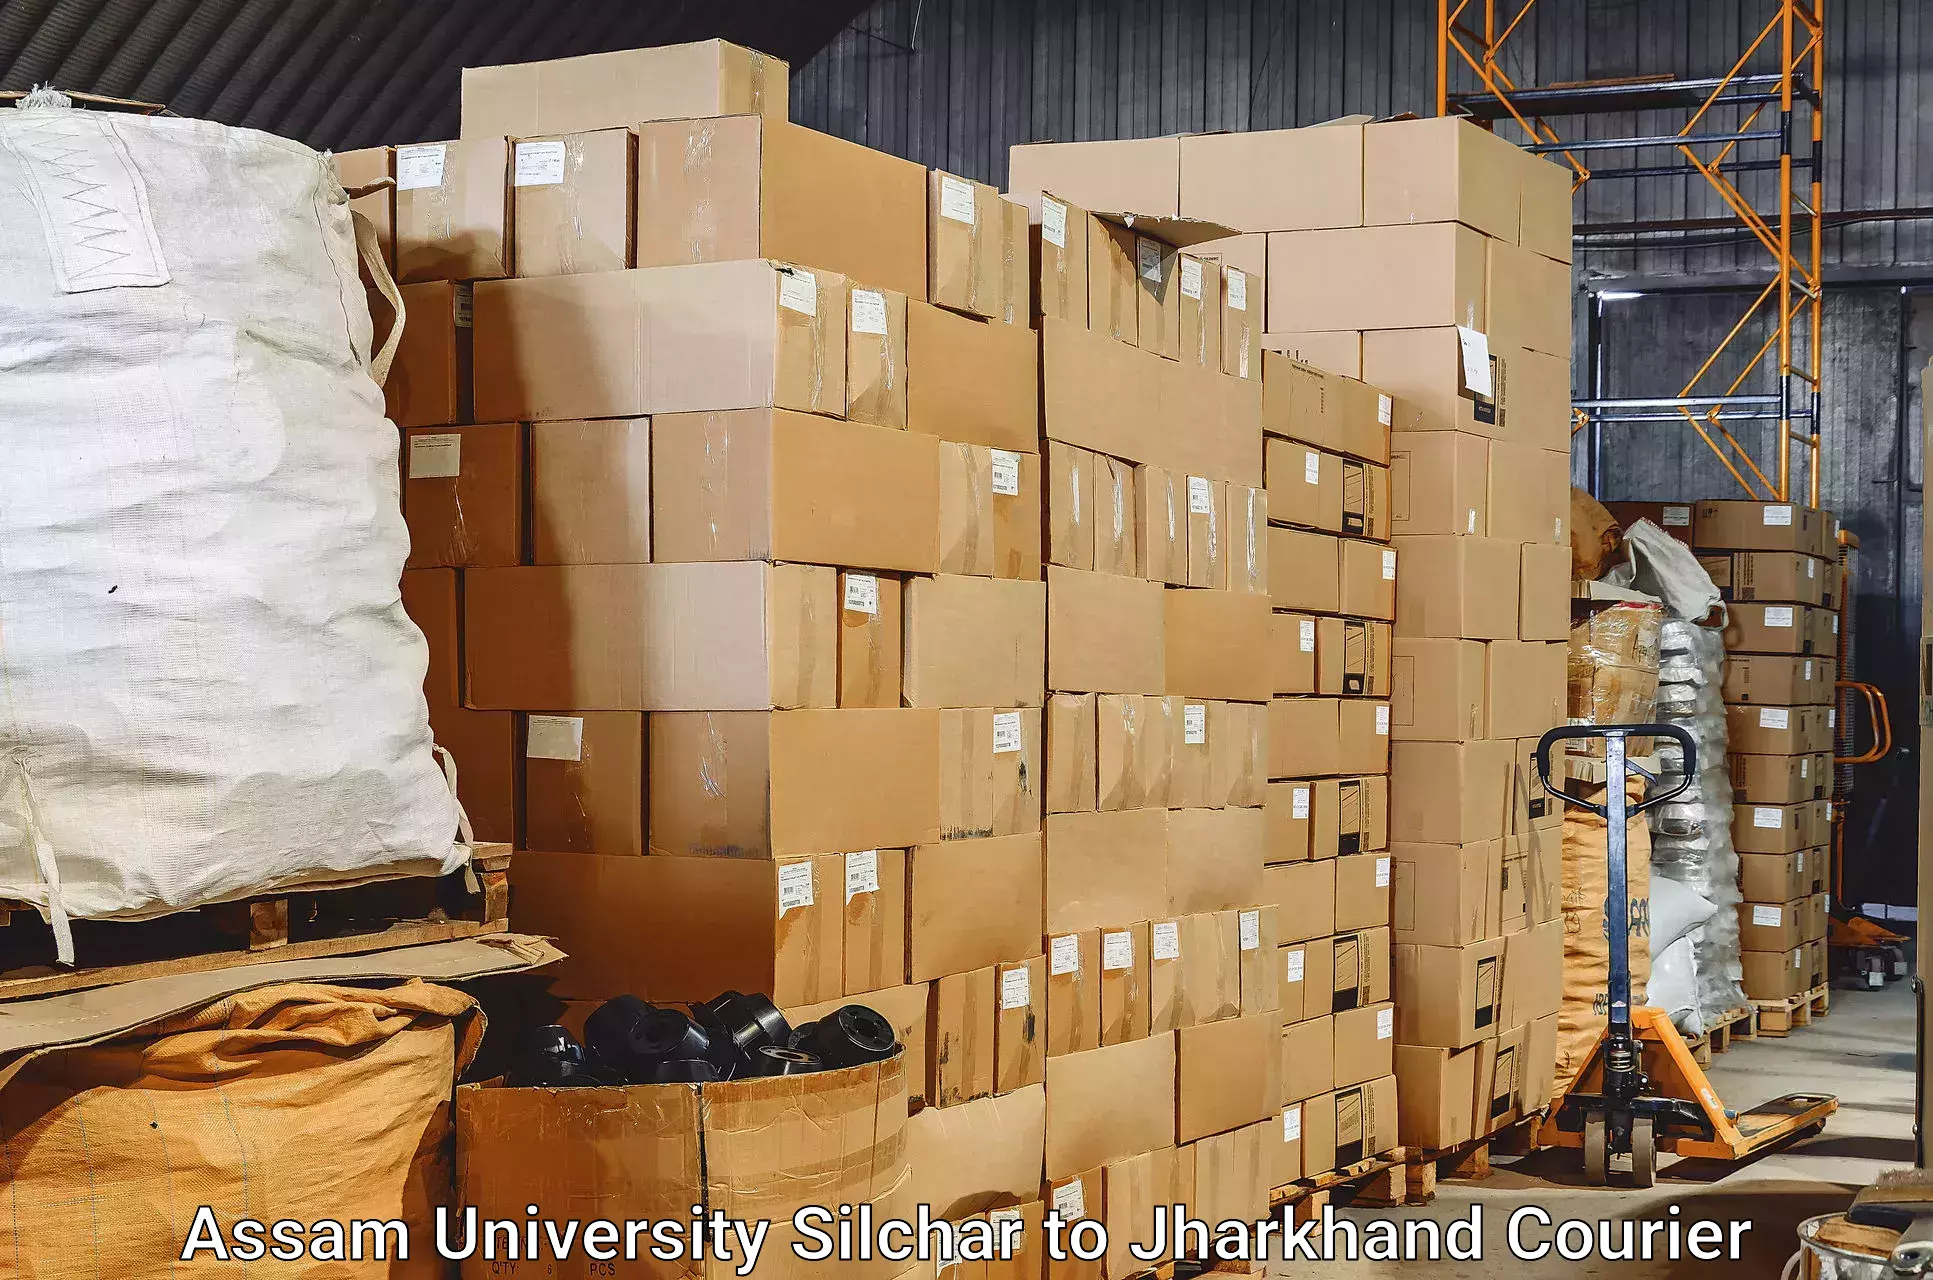 Luggage transfer service in Assam University Silchar to Jharkhand